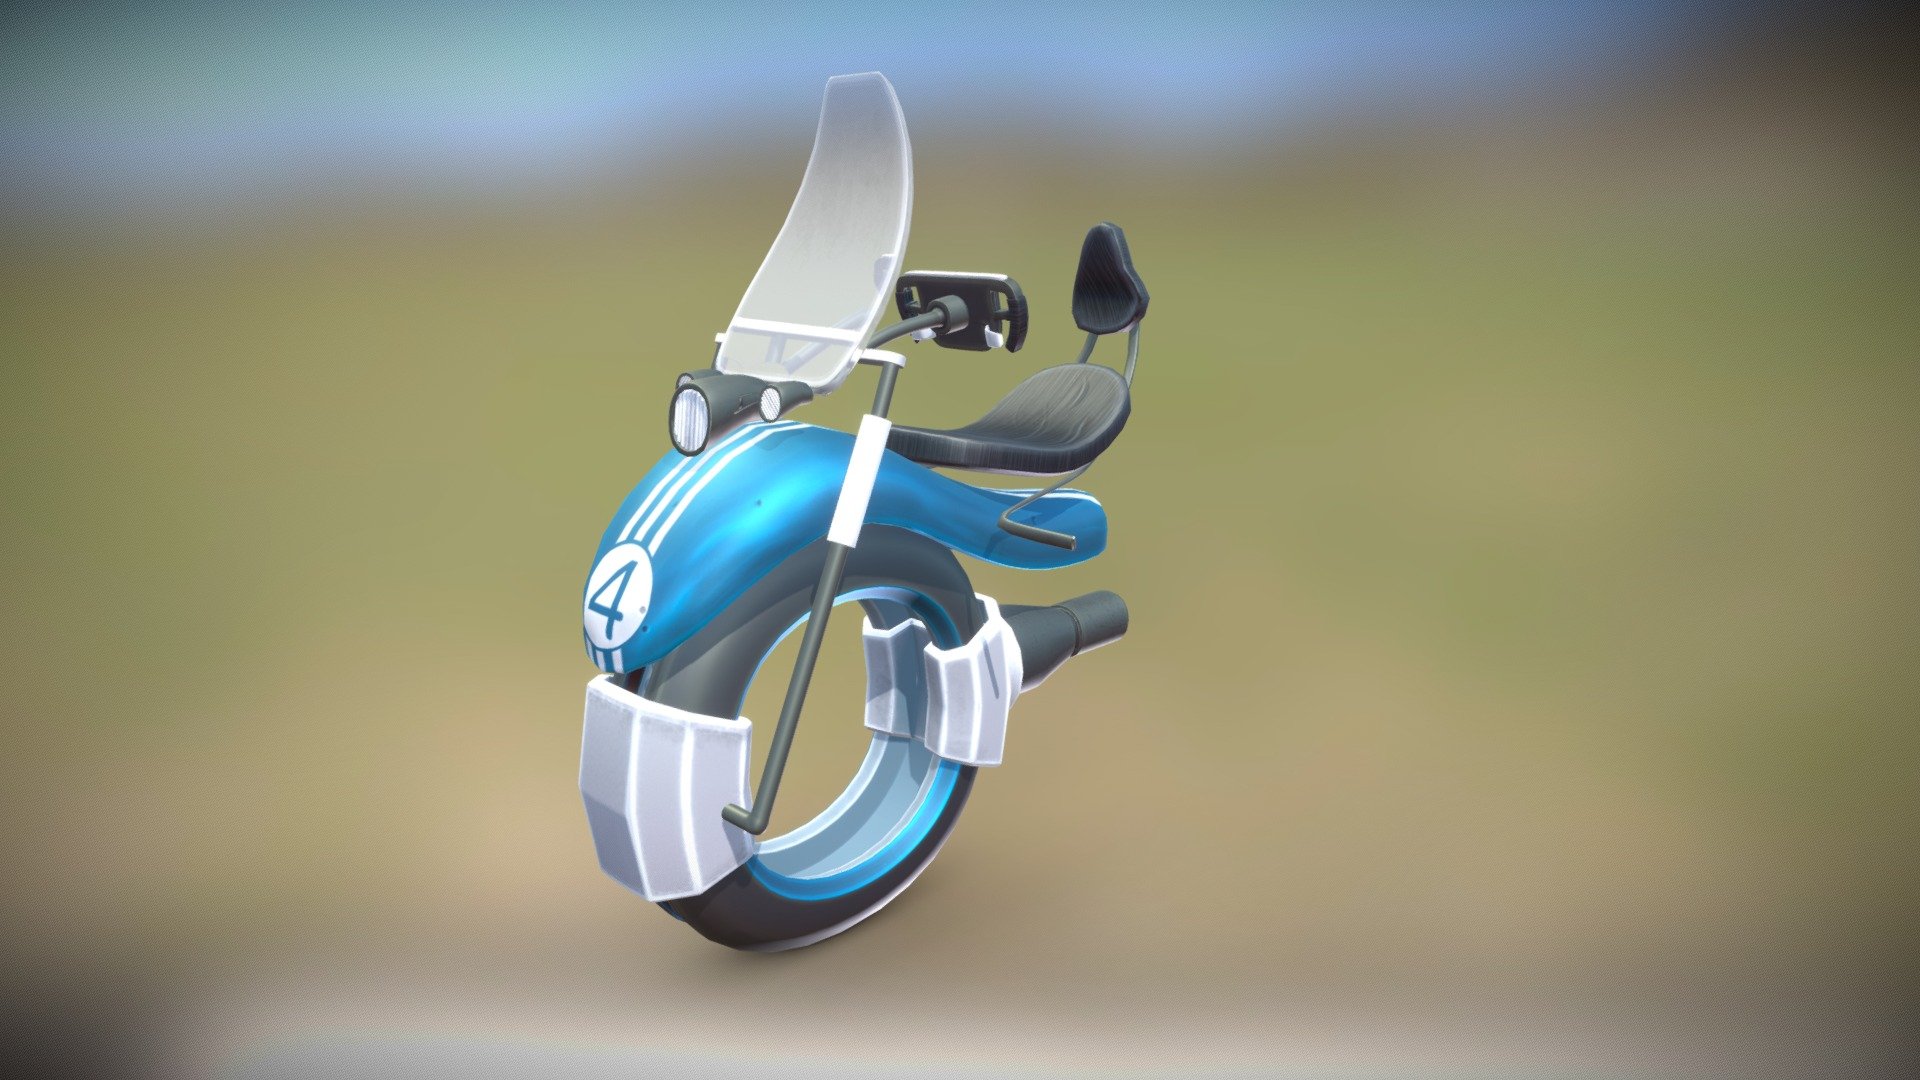 Made this bike as part of the motorcycle challenge. Had a fun time making it up on the fly. Let me know what you think! Thanks

DiscordMotorcycleChallenge - Sci-Fi Space Bike - 3D model by Tytan (@tylerhalterman) 3d model